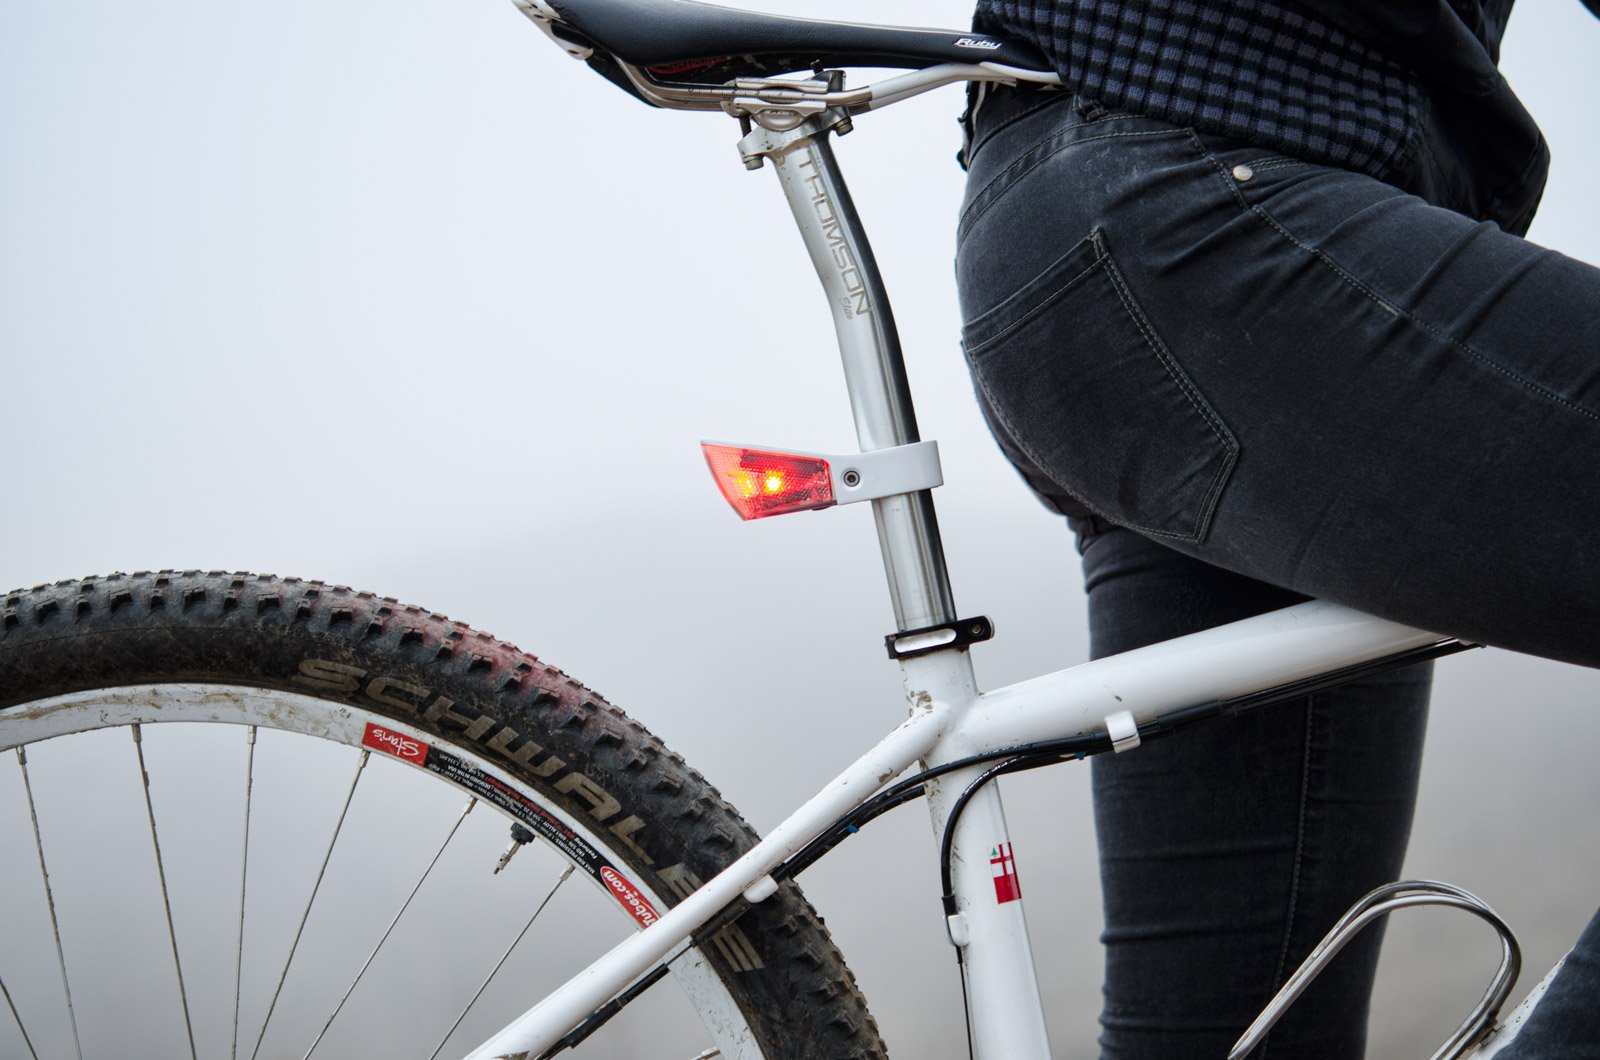 A close-up photo of a red, rear bicycle light mounted on a bike.